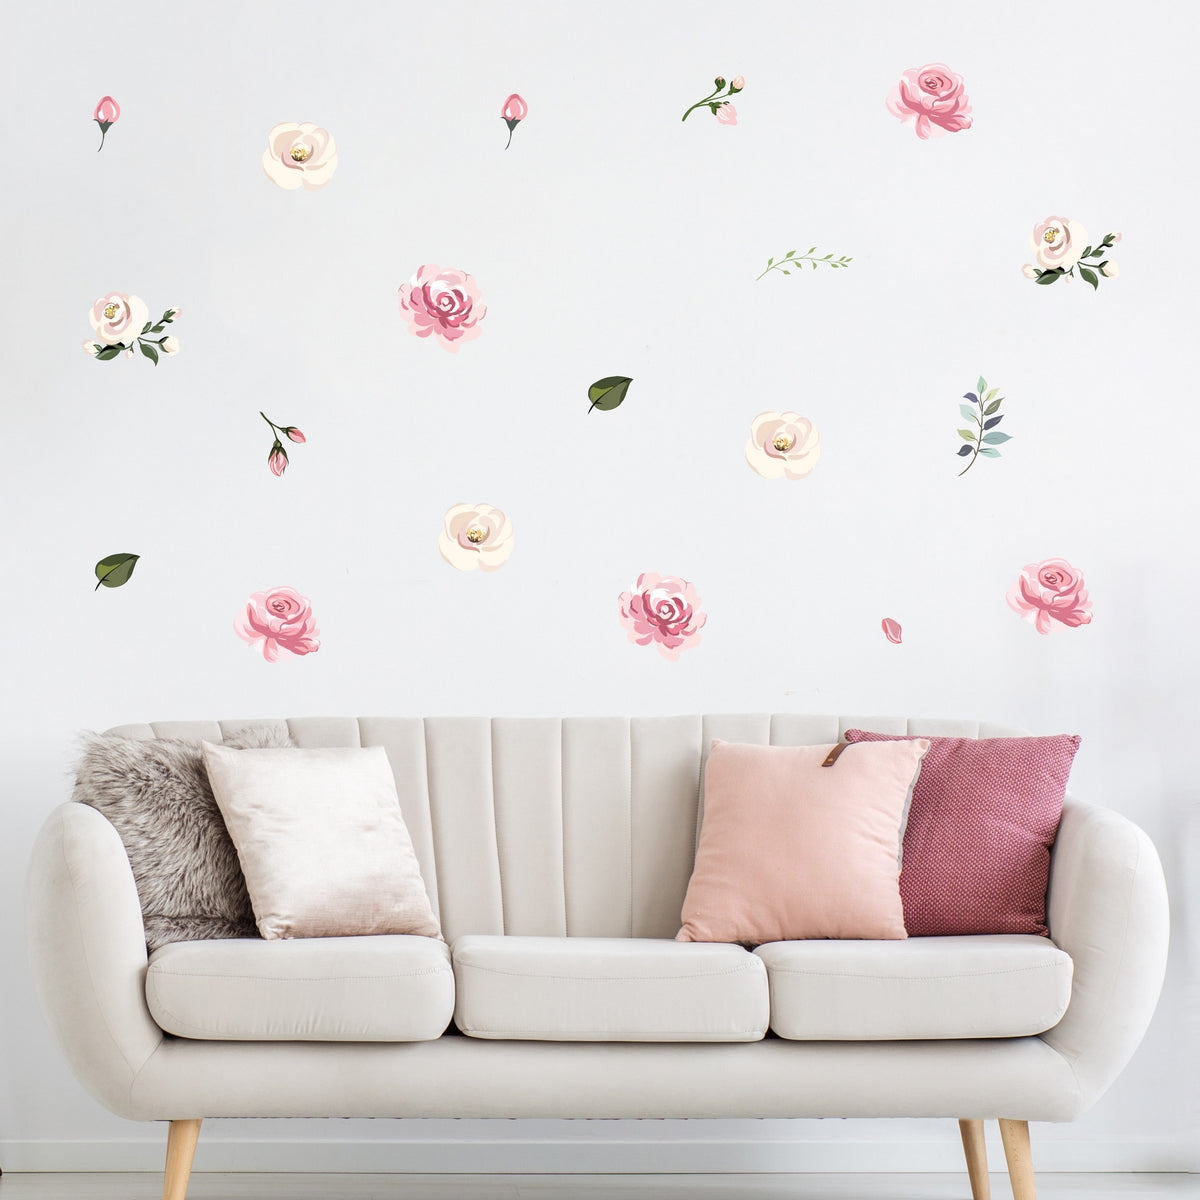 Pastel Floral Kids' Wall Decor - Decalcomania